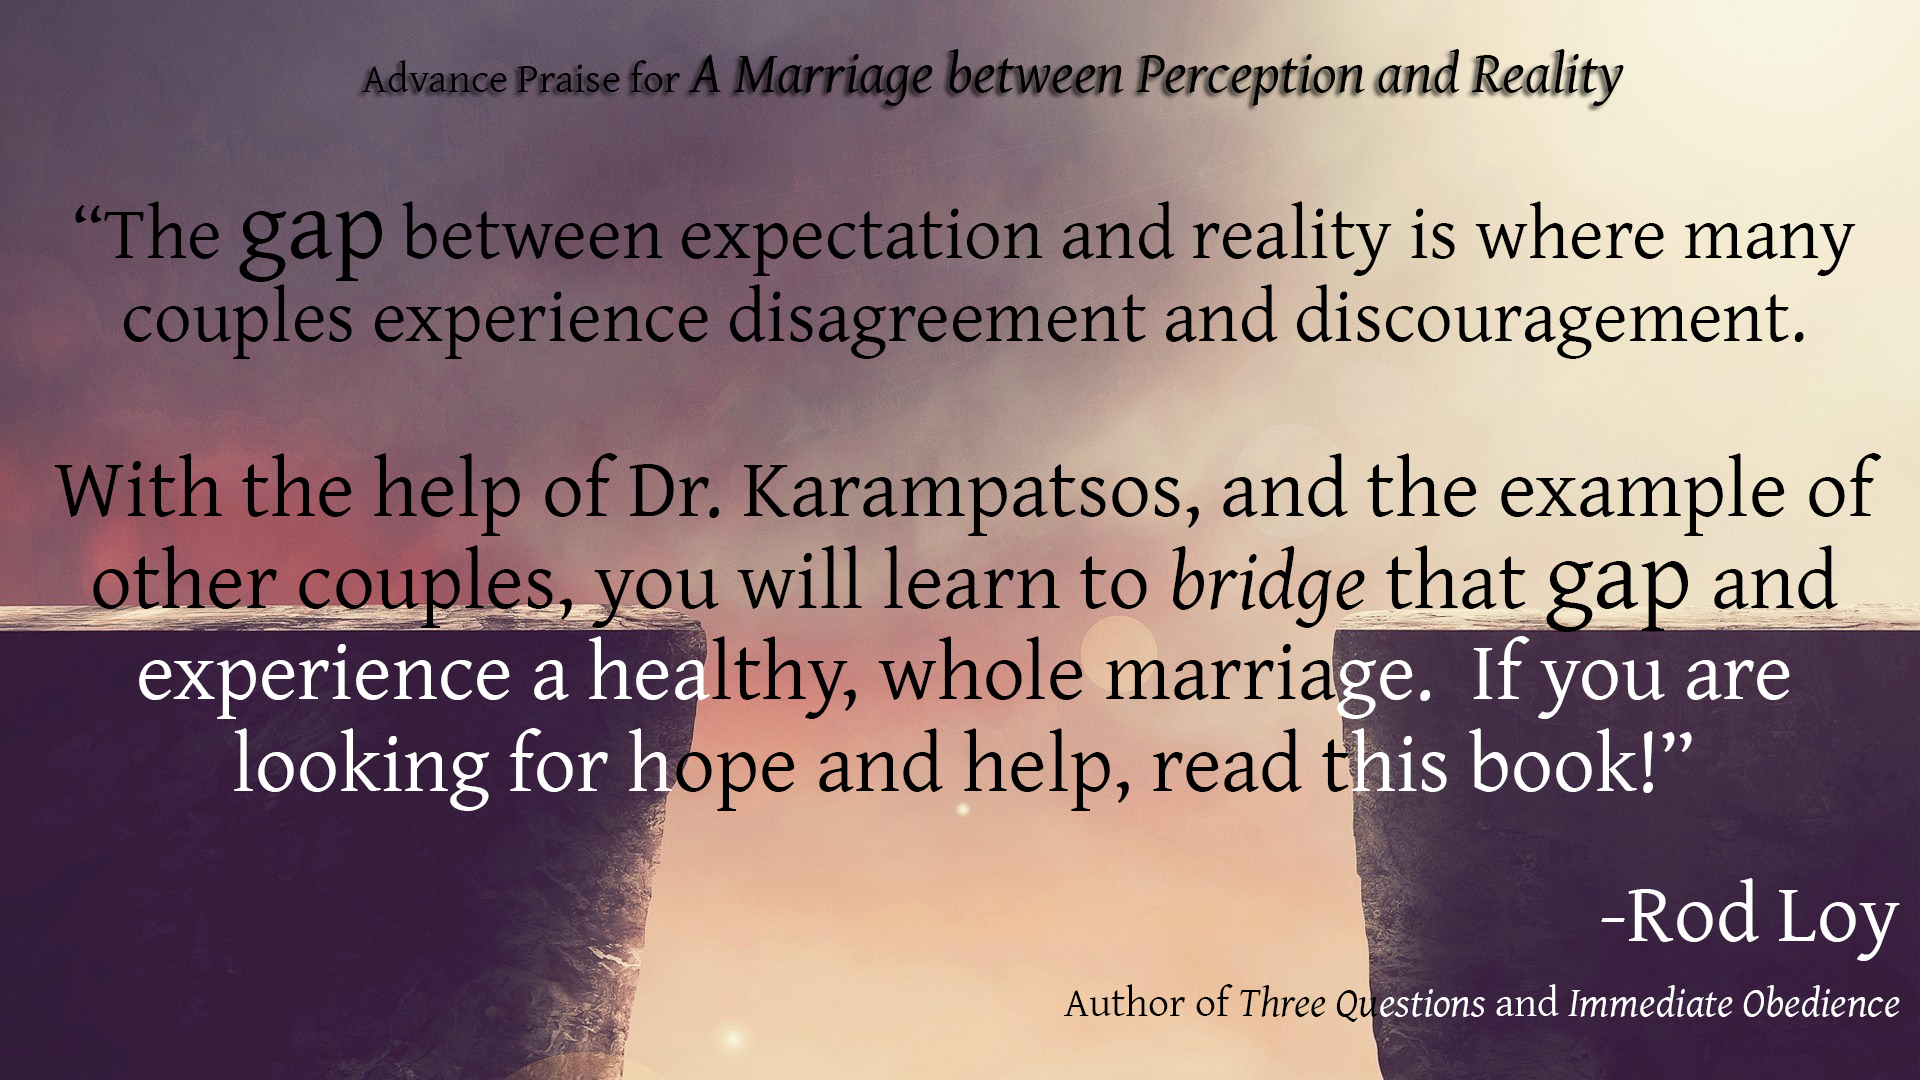 Rod Loy’s Advance Praise for: A Marriage between Perception and Reality